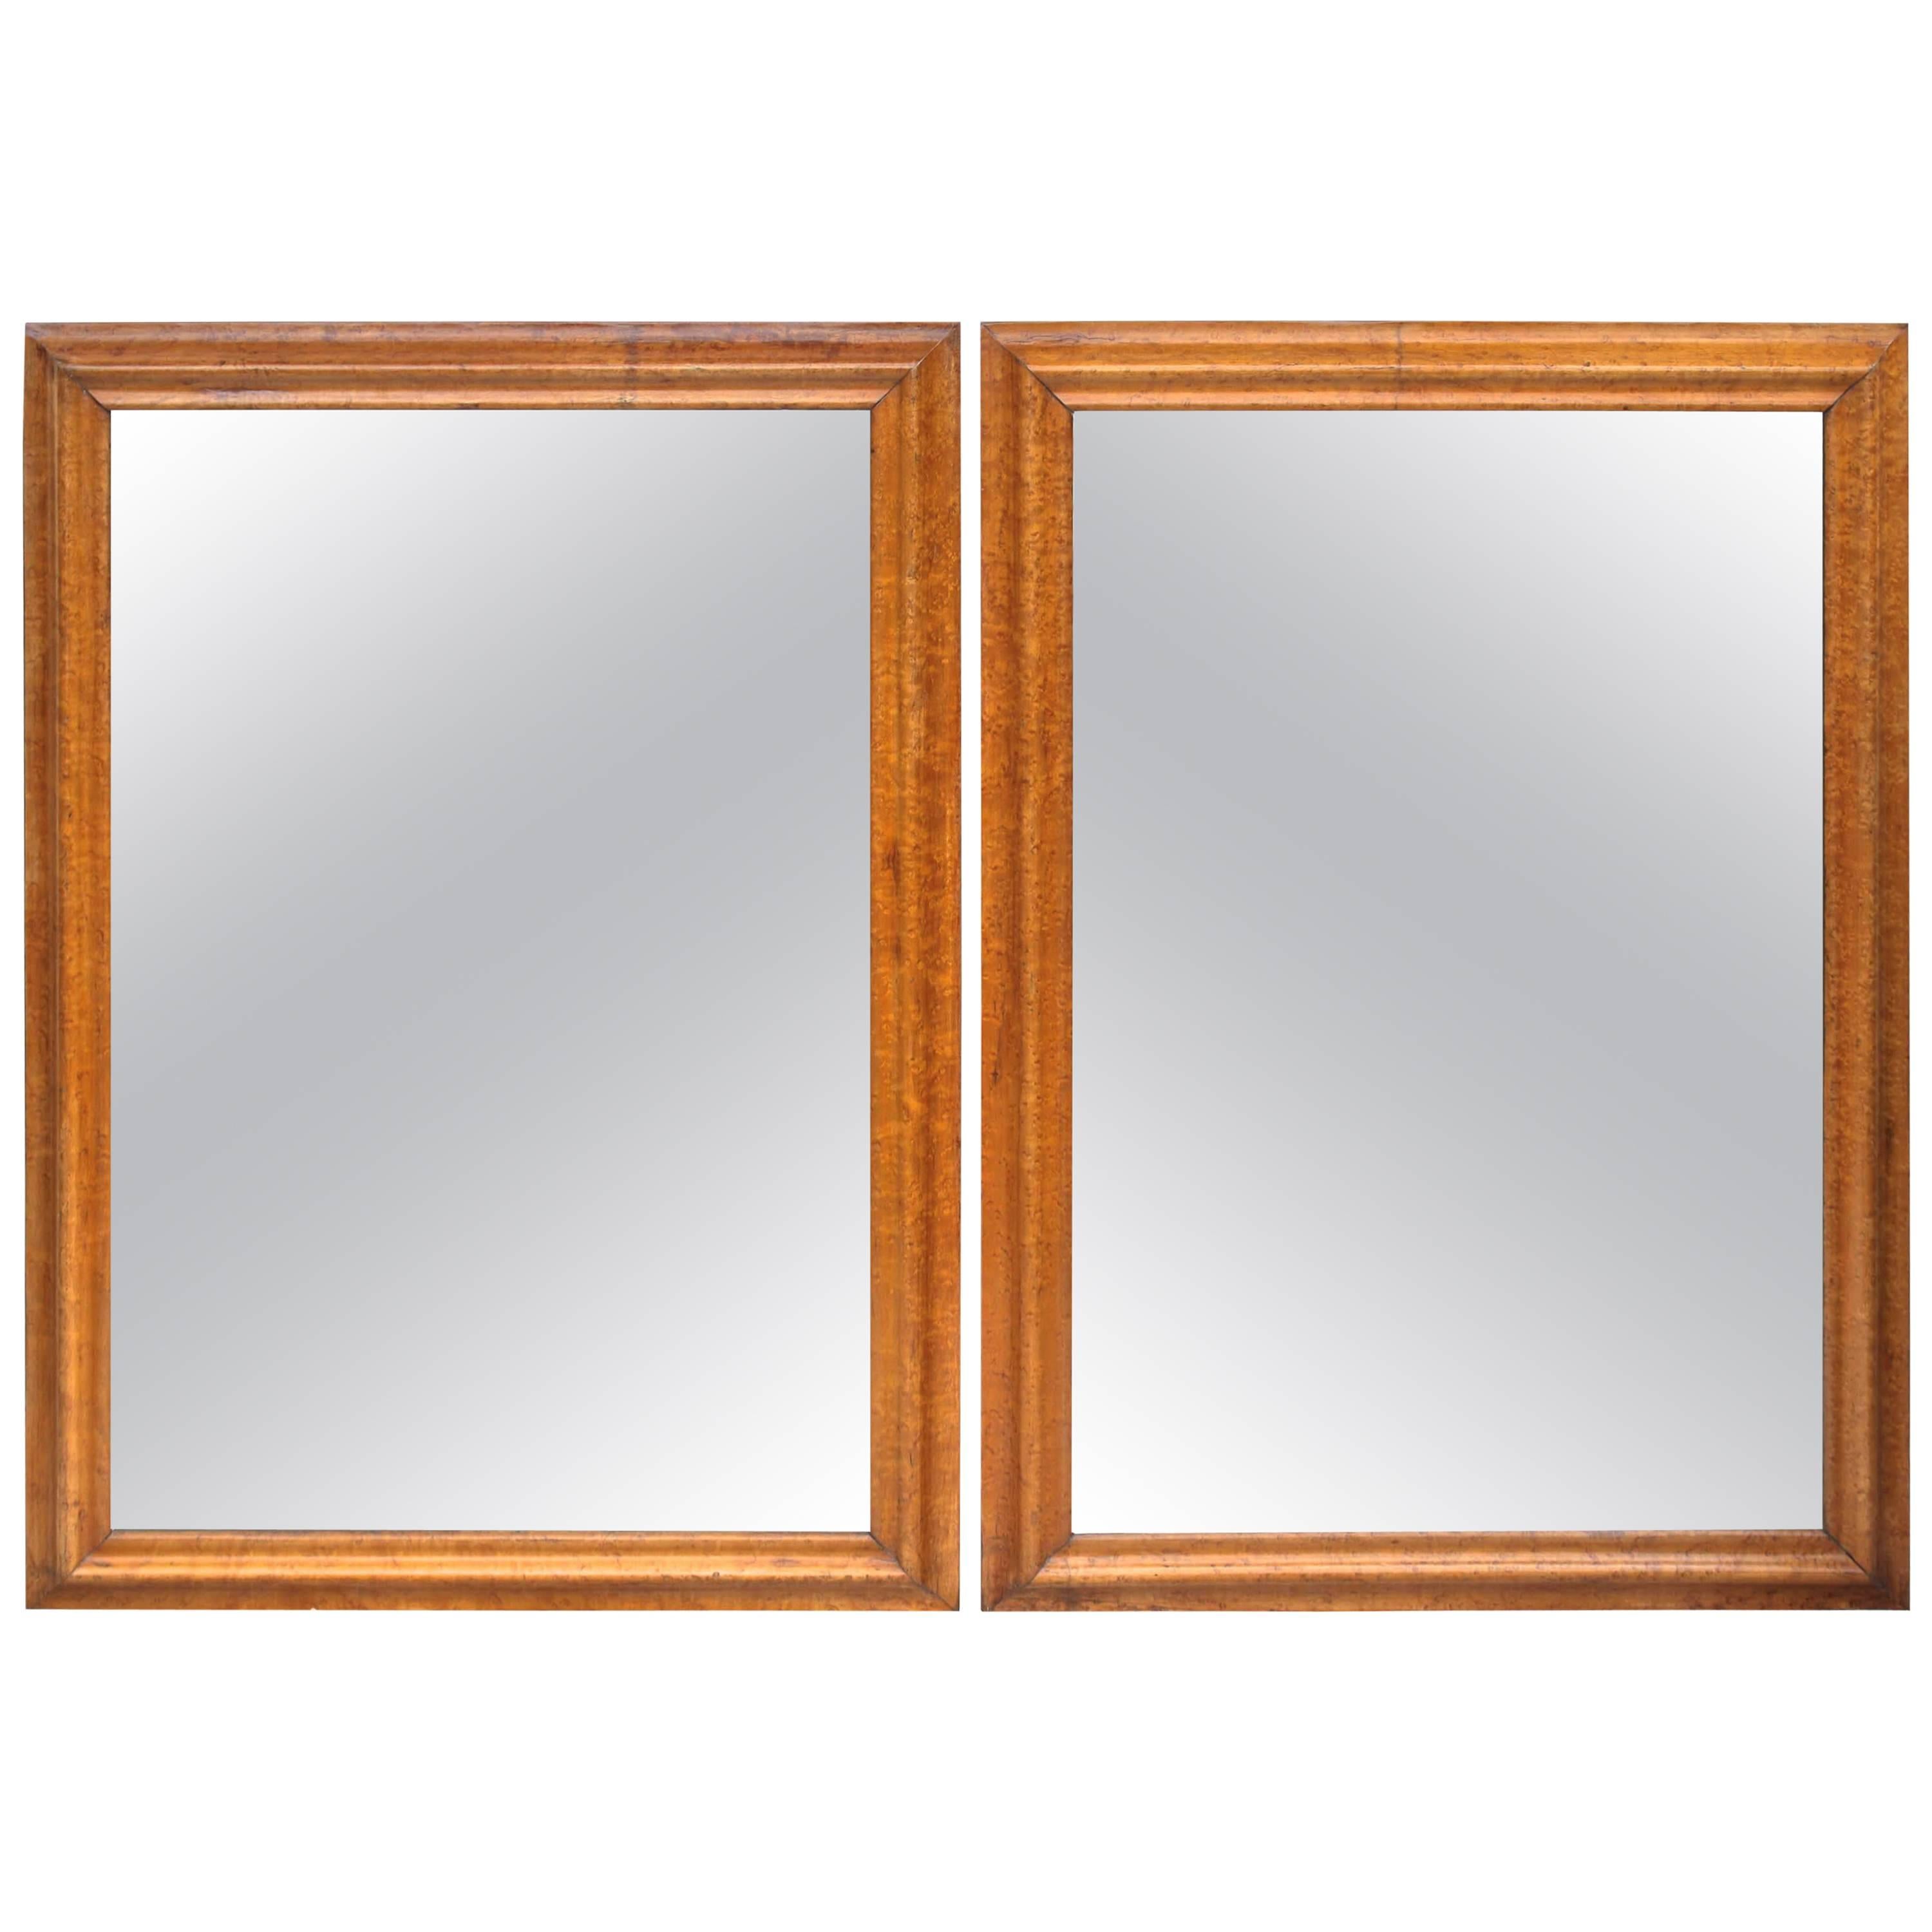 Pair of Colonial Revival Birdseye Maple Mirrors For Sale